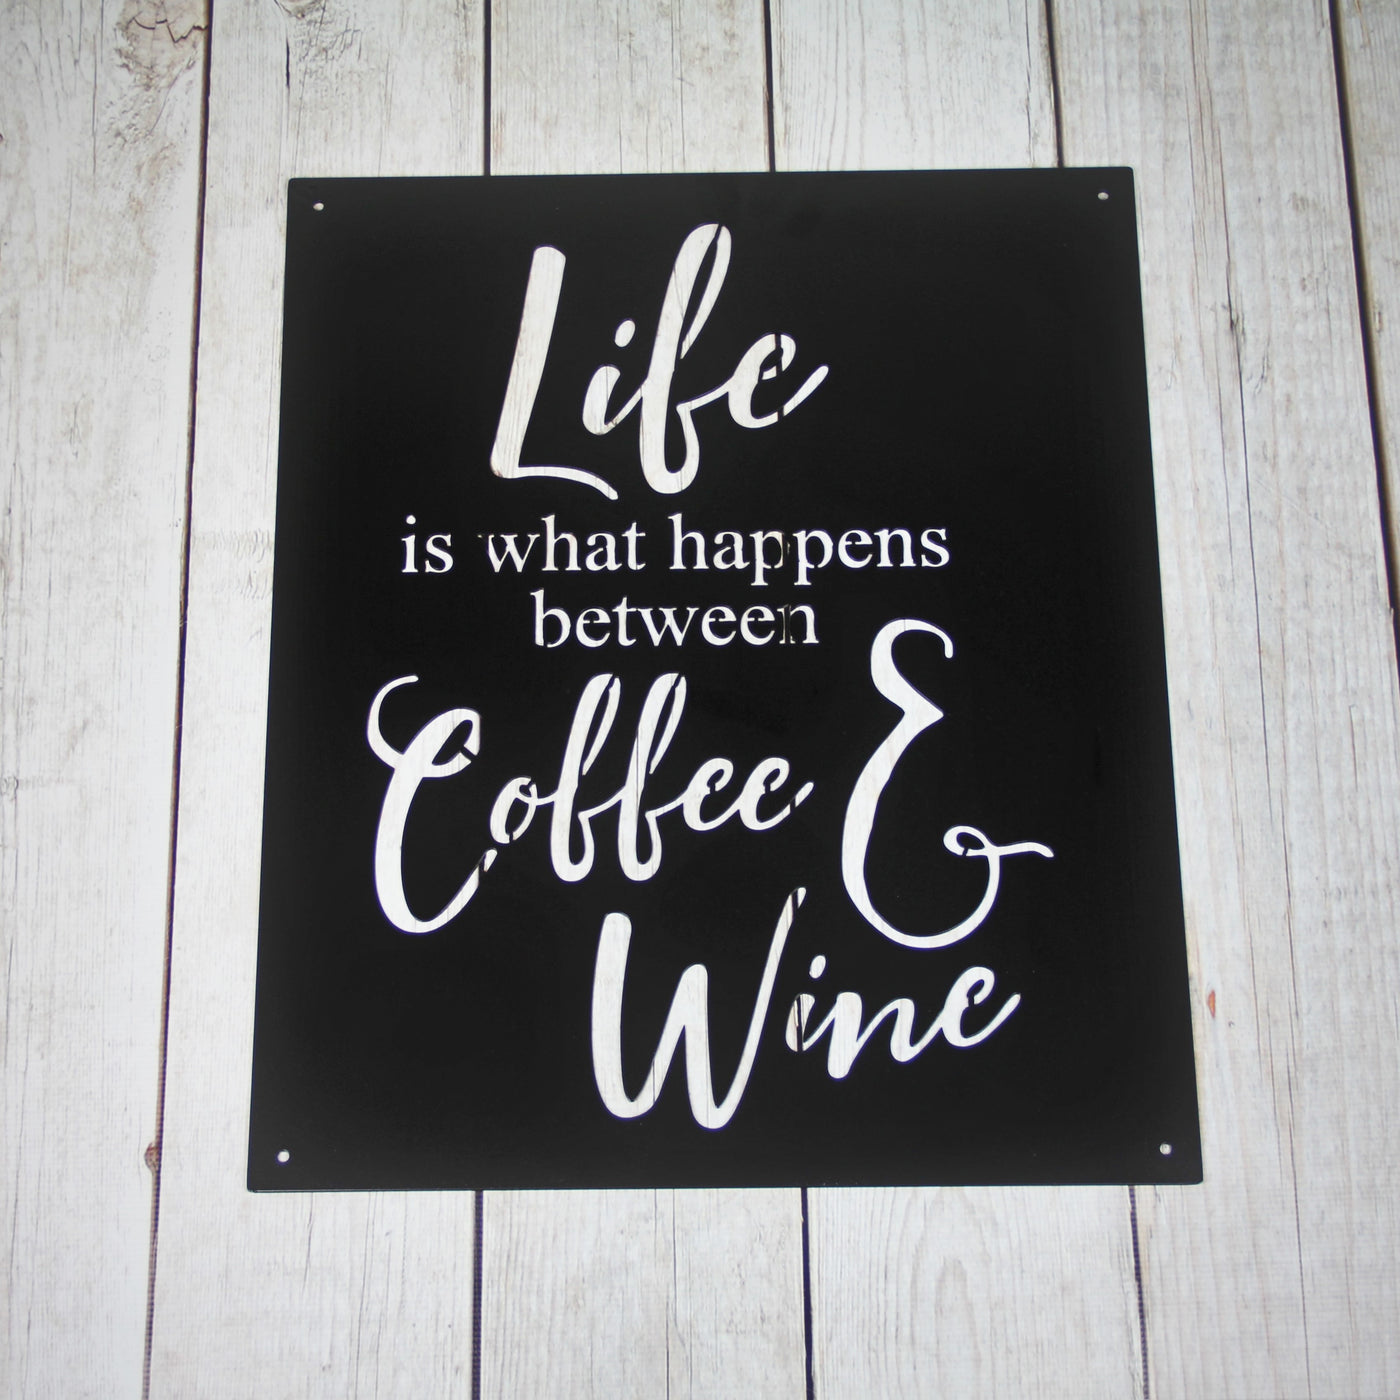 Coffee and Wine Metal Word Sign - Madison Iron and Wood - Wall Art - metal outdoor decor - Steel deocrations - american made products - veteran owned business products - fencing decorations - fencing supplies - custom wall decorations - personalized wall signs - steel - decorative post caps - steel post caps - metal post caps - brackets - structural brackets - home improvement - easter - easter decorations - easter gift - easter yard decor